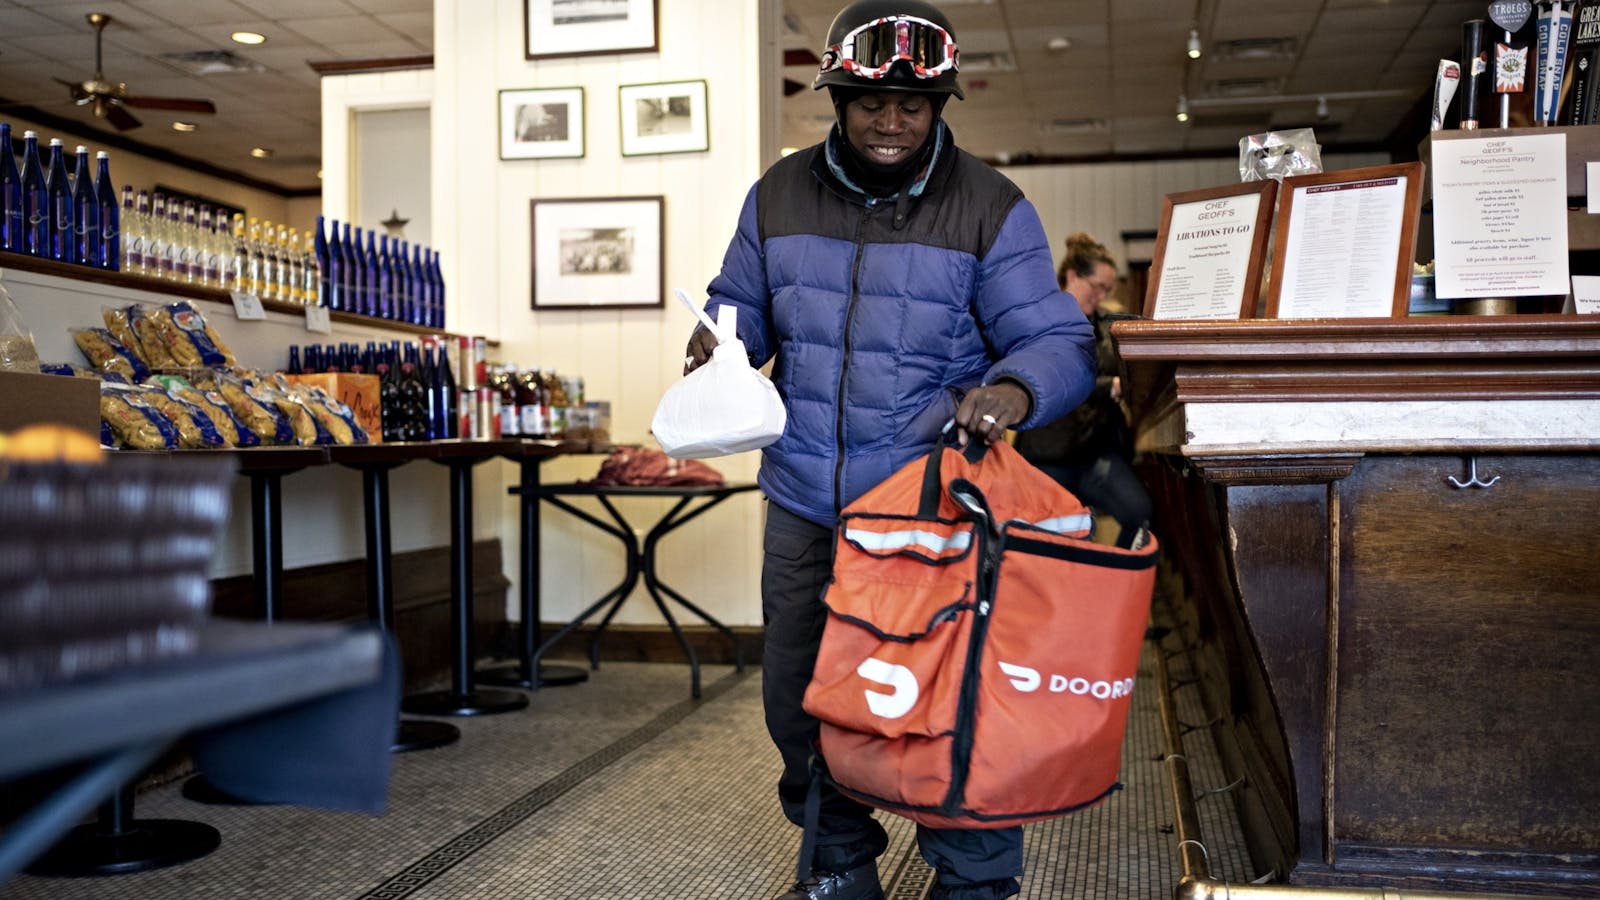 A DoorDash delivery person in Washington D.C. Photo by Bloomberg